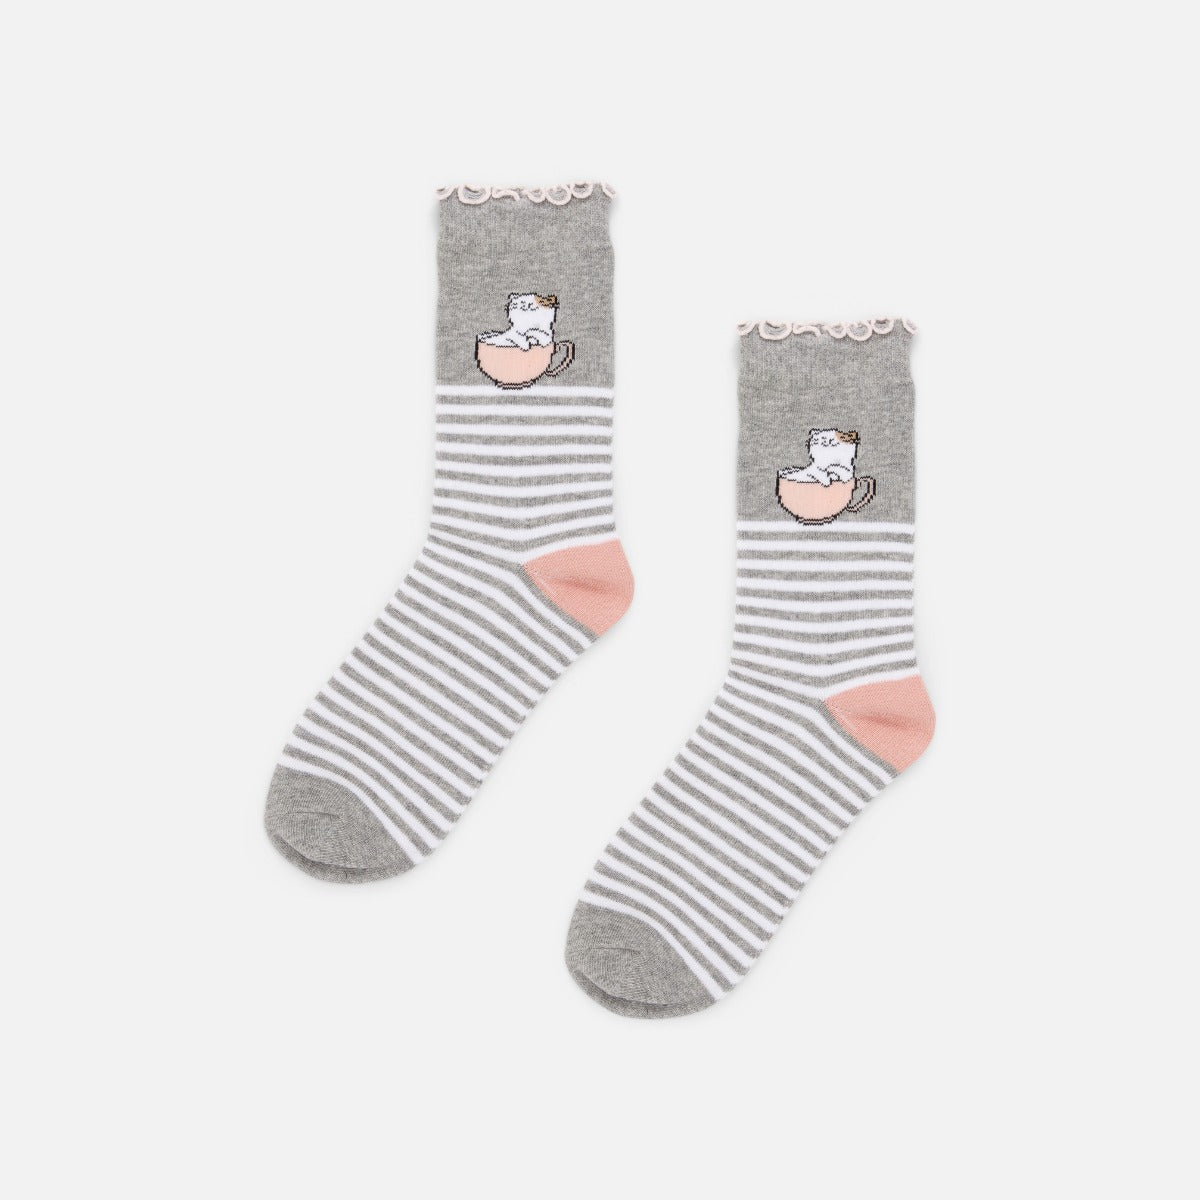 Grey and pink socks with white stripes and cat and scalloped edge